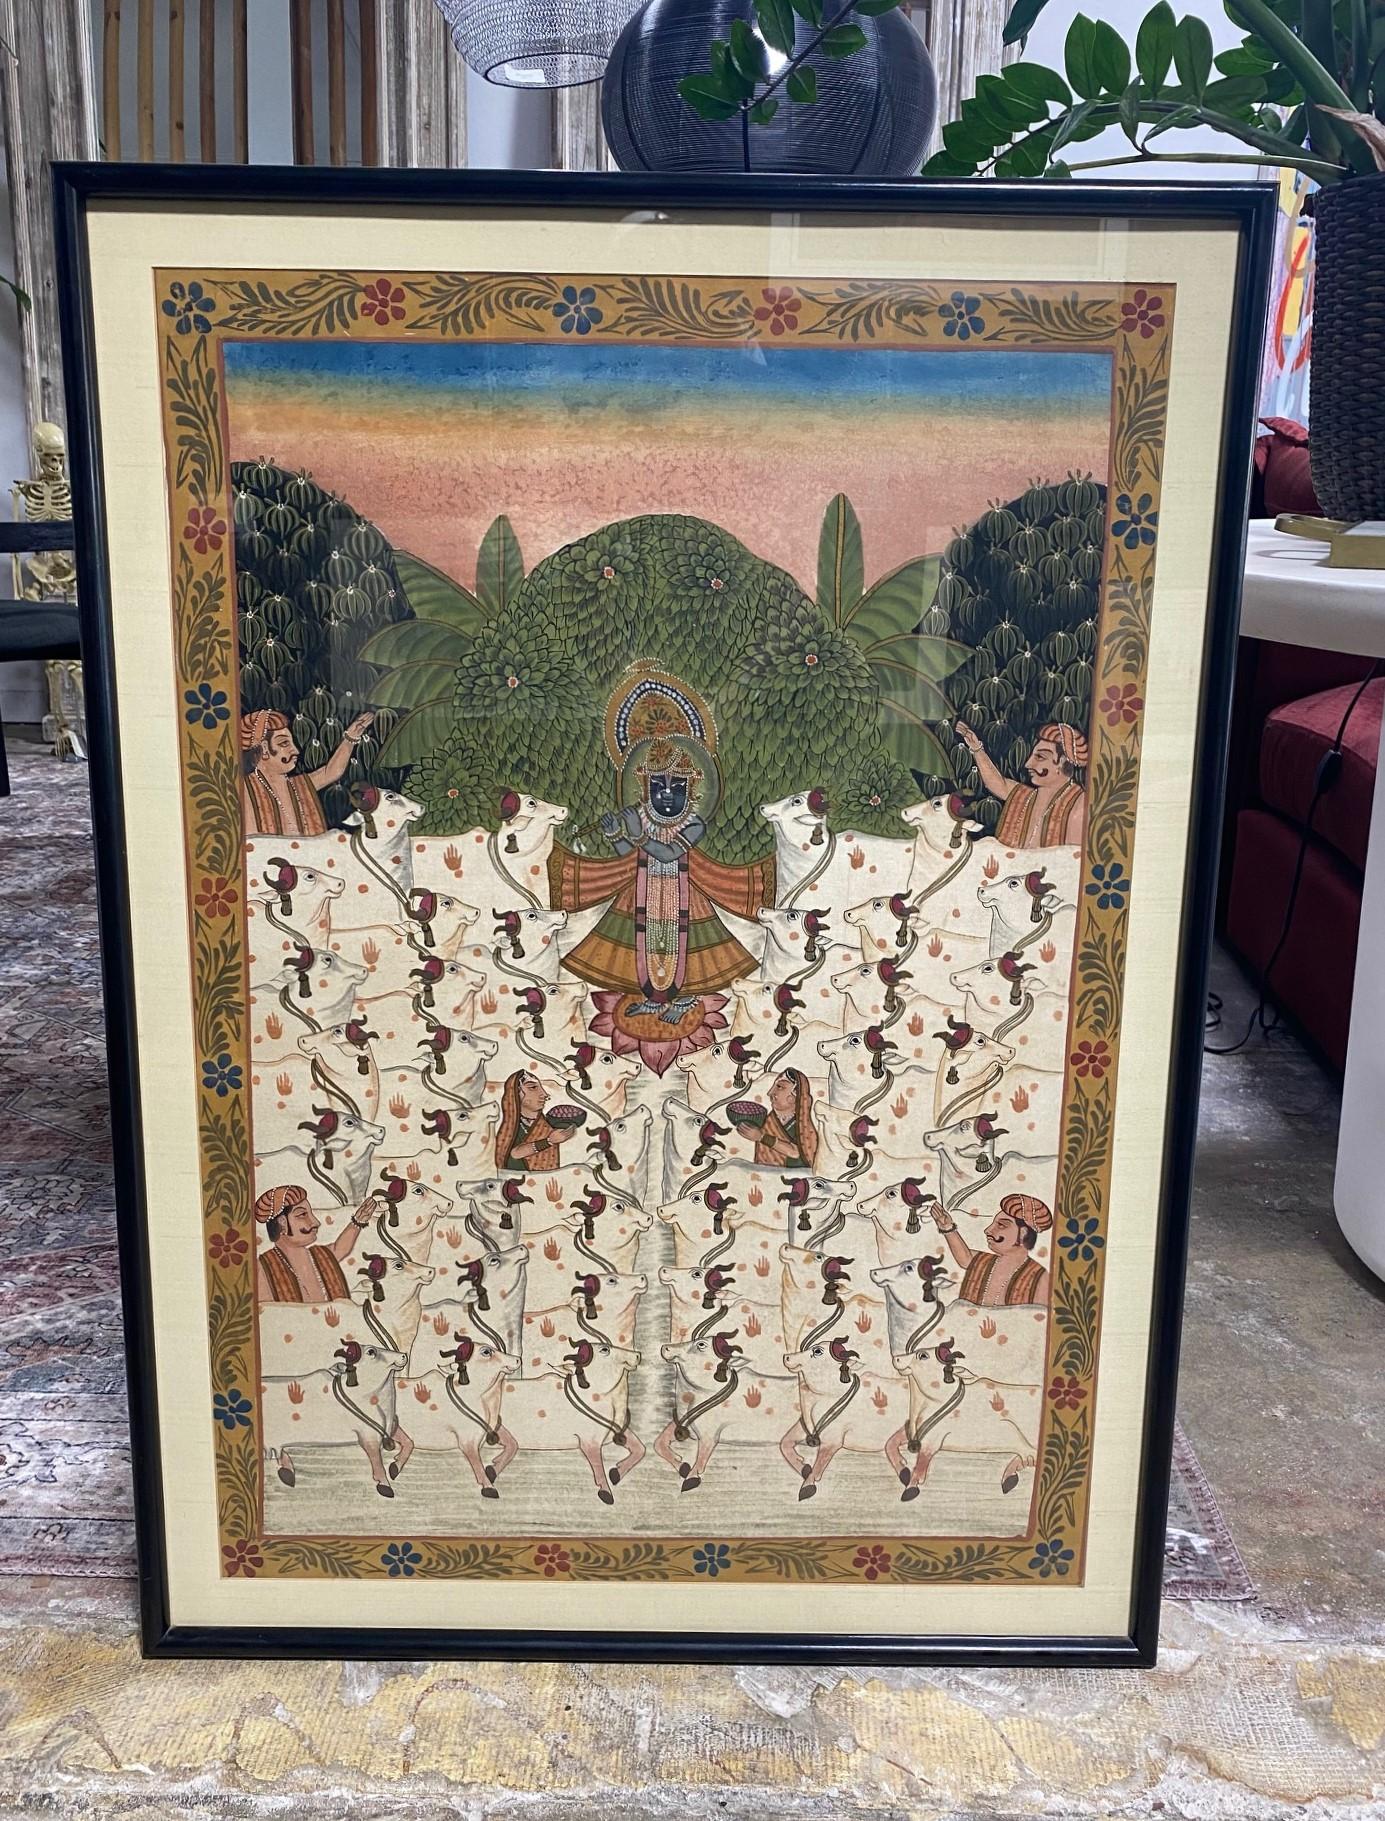 A truly gorgeous and engaging South Indian Asian (India) Pichwai Painting featuring Lord Krishna (sometimes incarnated as Lord Shreenath) - the Hindu God of protection, compassion, tenderness, and love - playing his flute (or bansuri) and calling